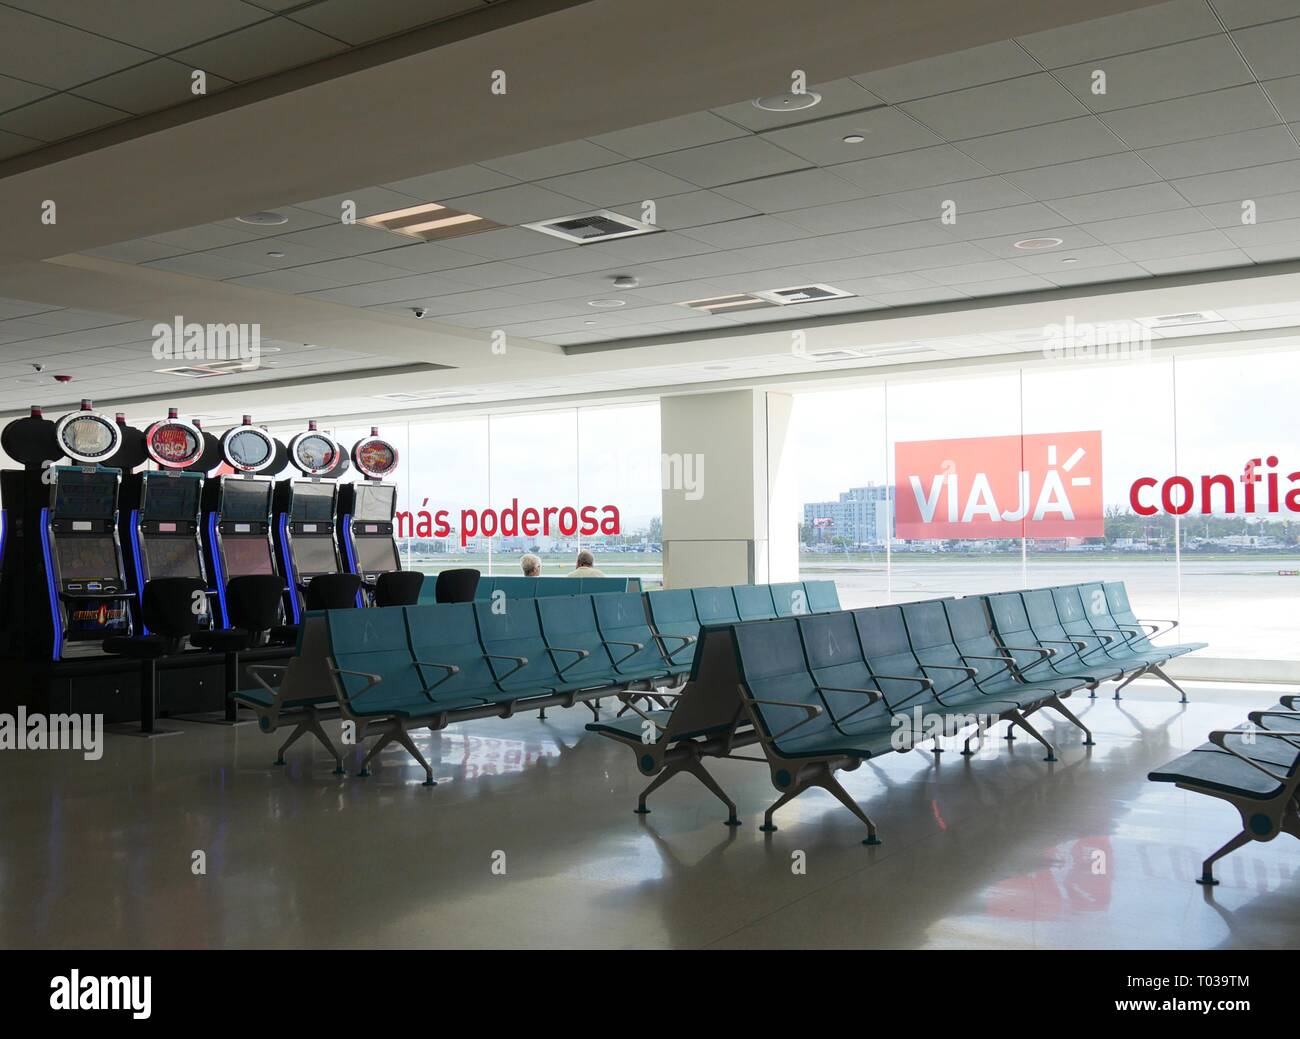 SAN JUAN, PUERTO RICO—MARCH 2017: Empty seats at one of the pre-departure areas of the Luis Muñoz Marín International Airport in Puerto Rico. Stock Photo